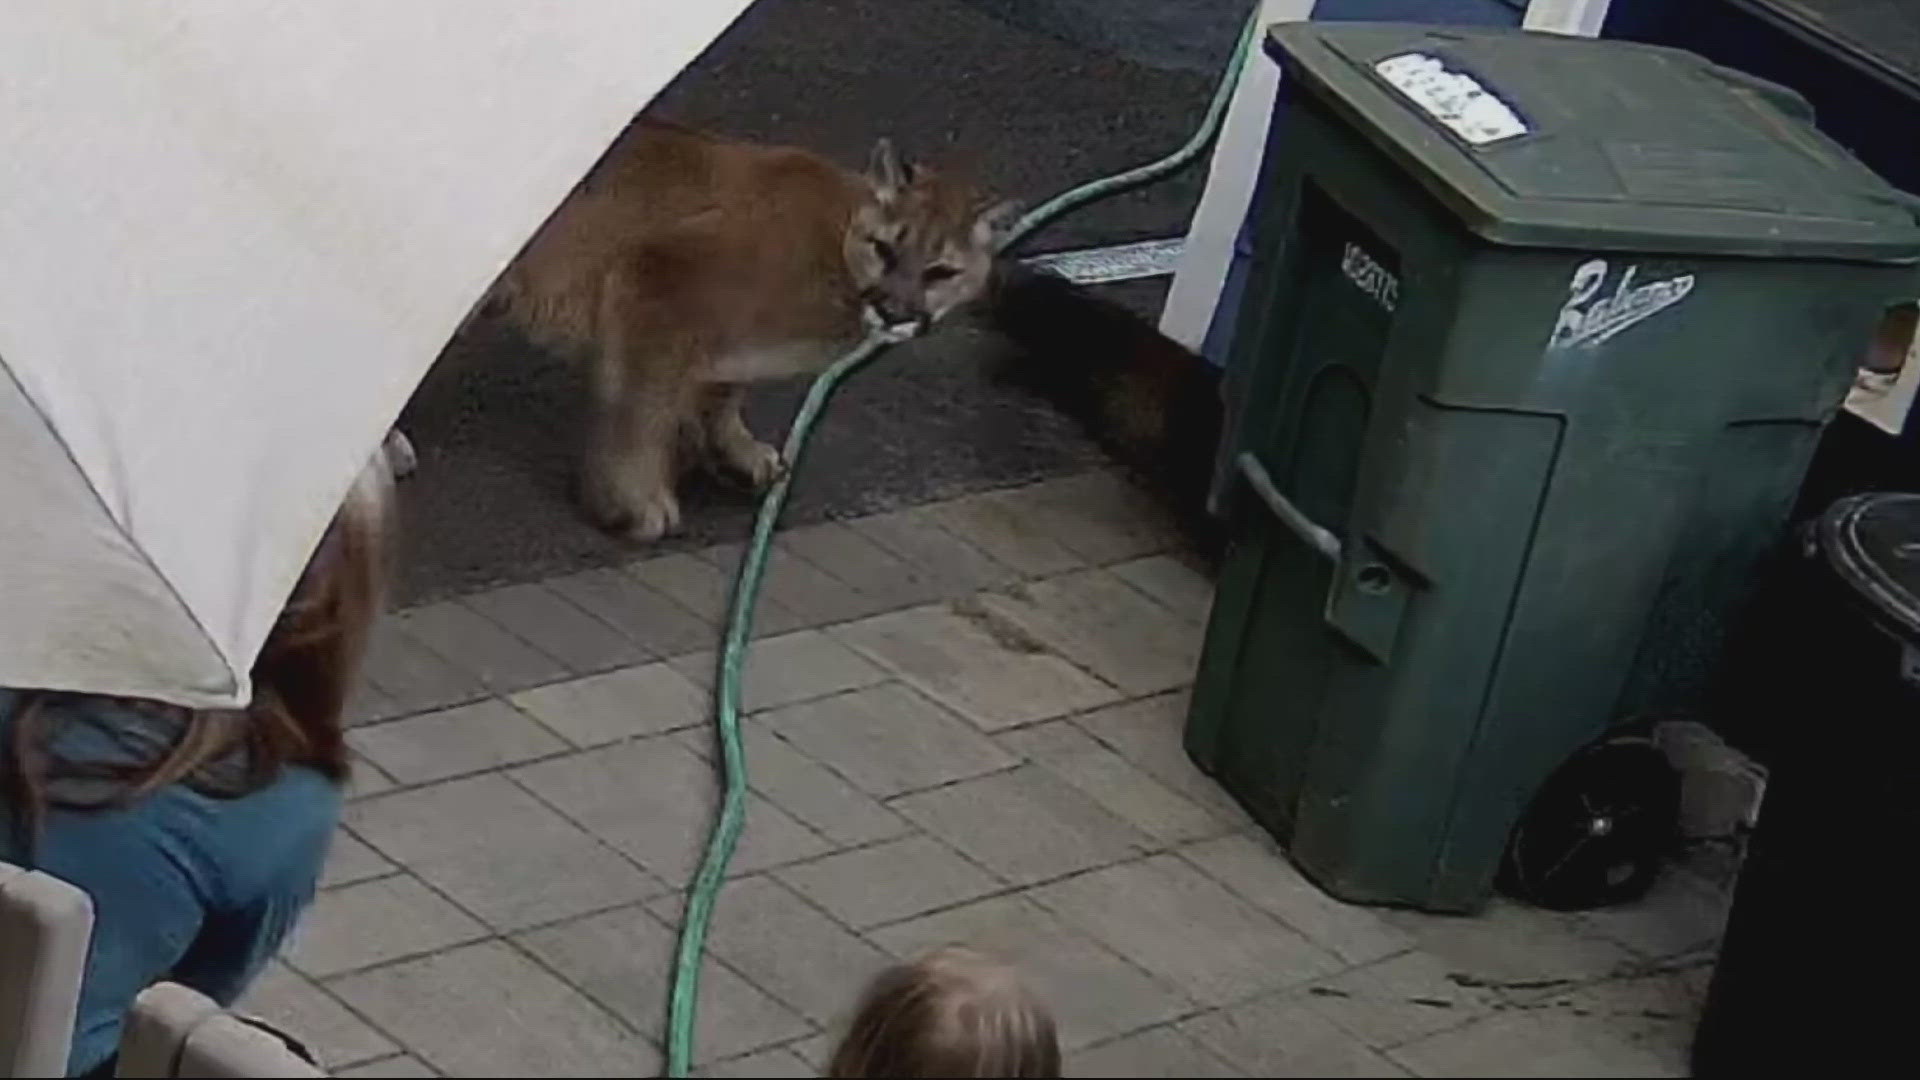 A cougar ran into the family's backyard while chasing a cat; the family was able to scare it away with no one injured.